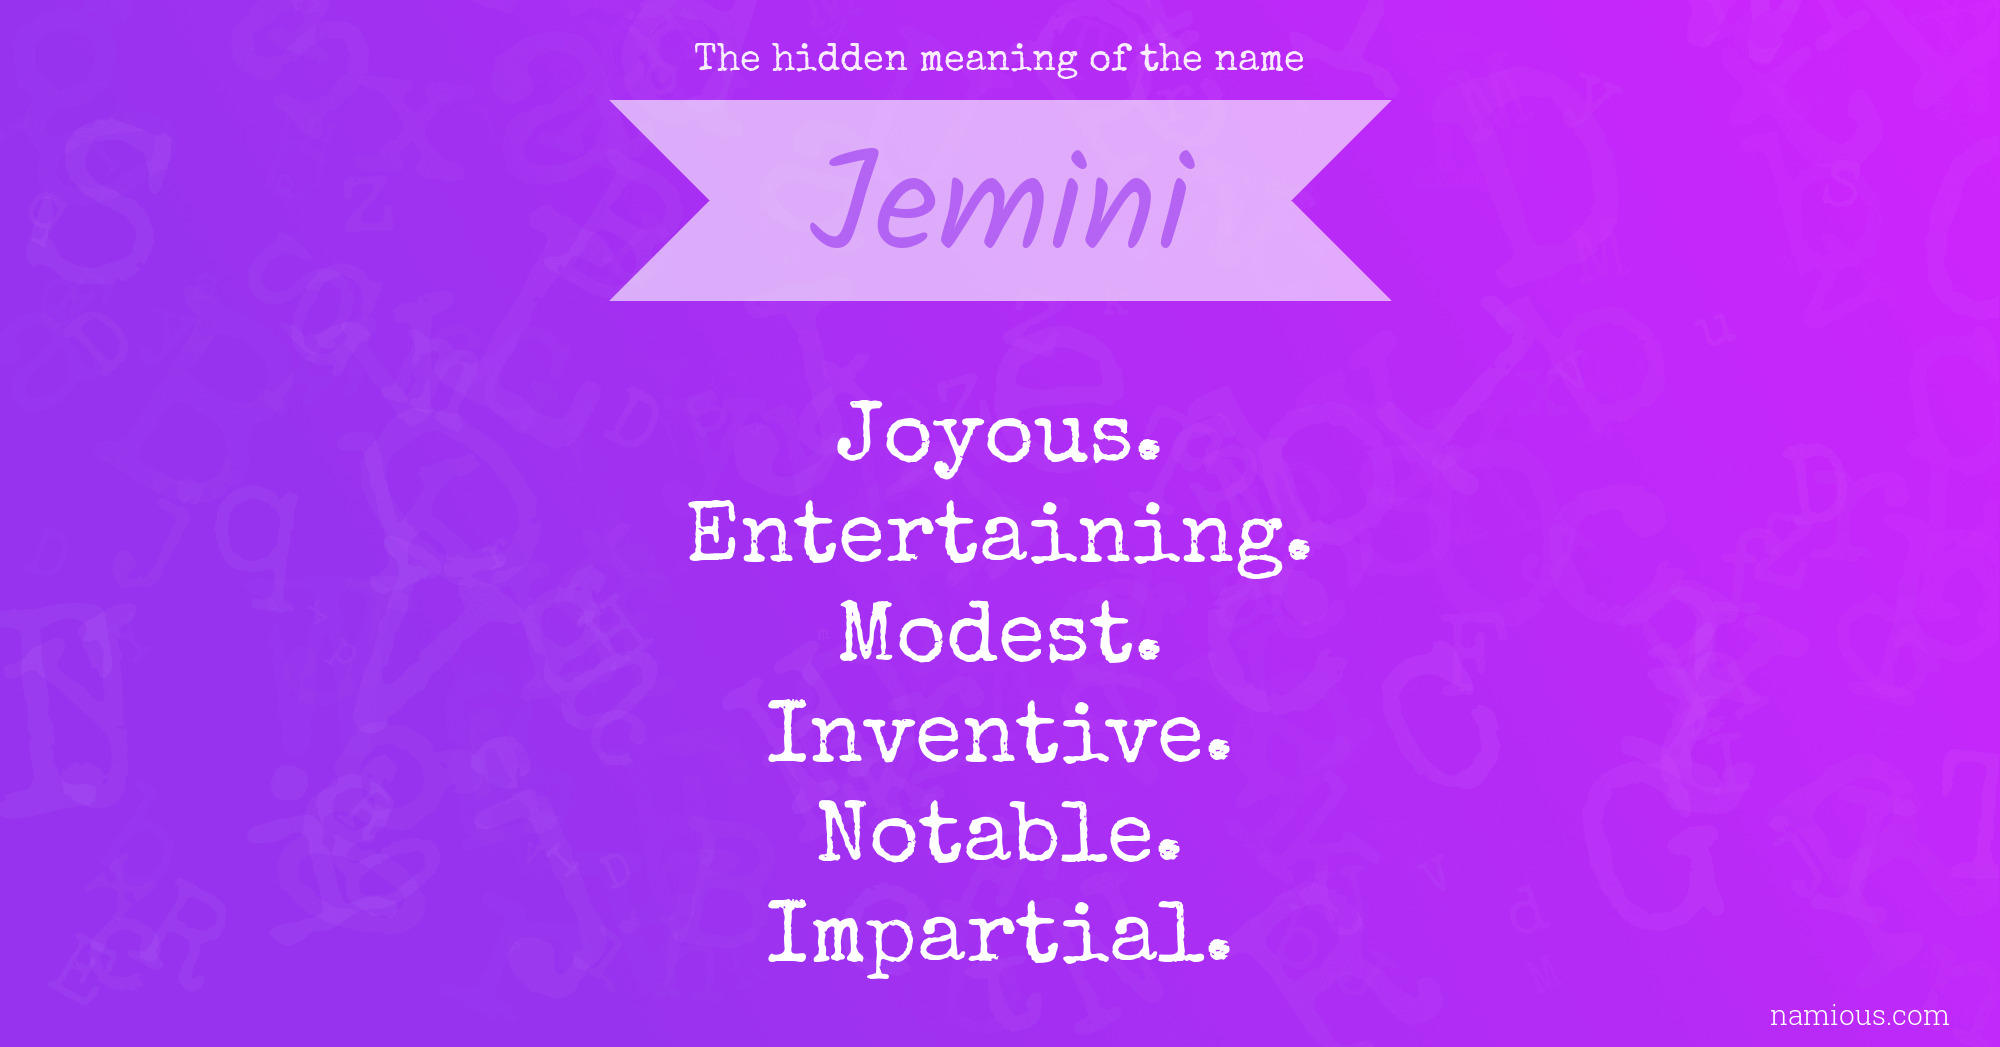 The hidden meaning of the name Jemini